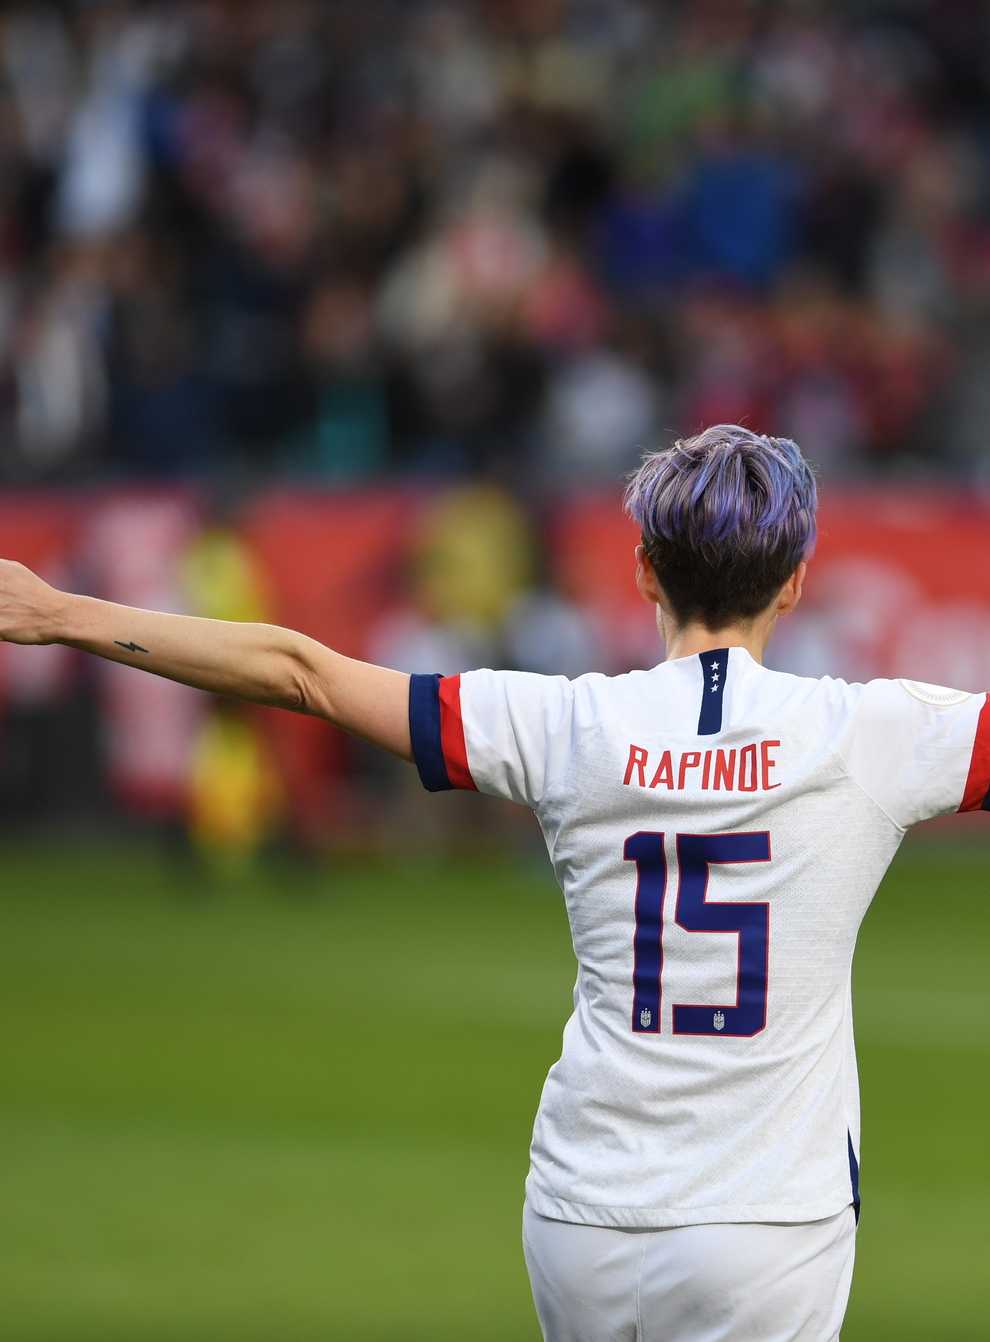 Rapinoe will hope to feature in the friendlies (PA Images)